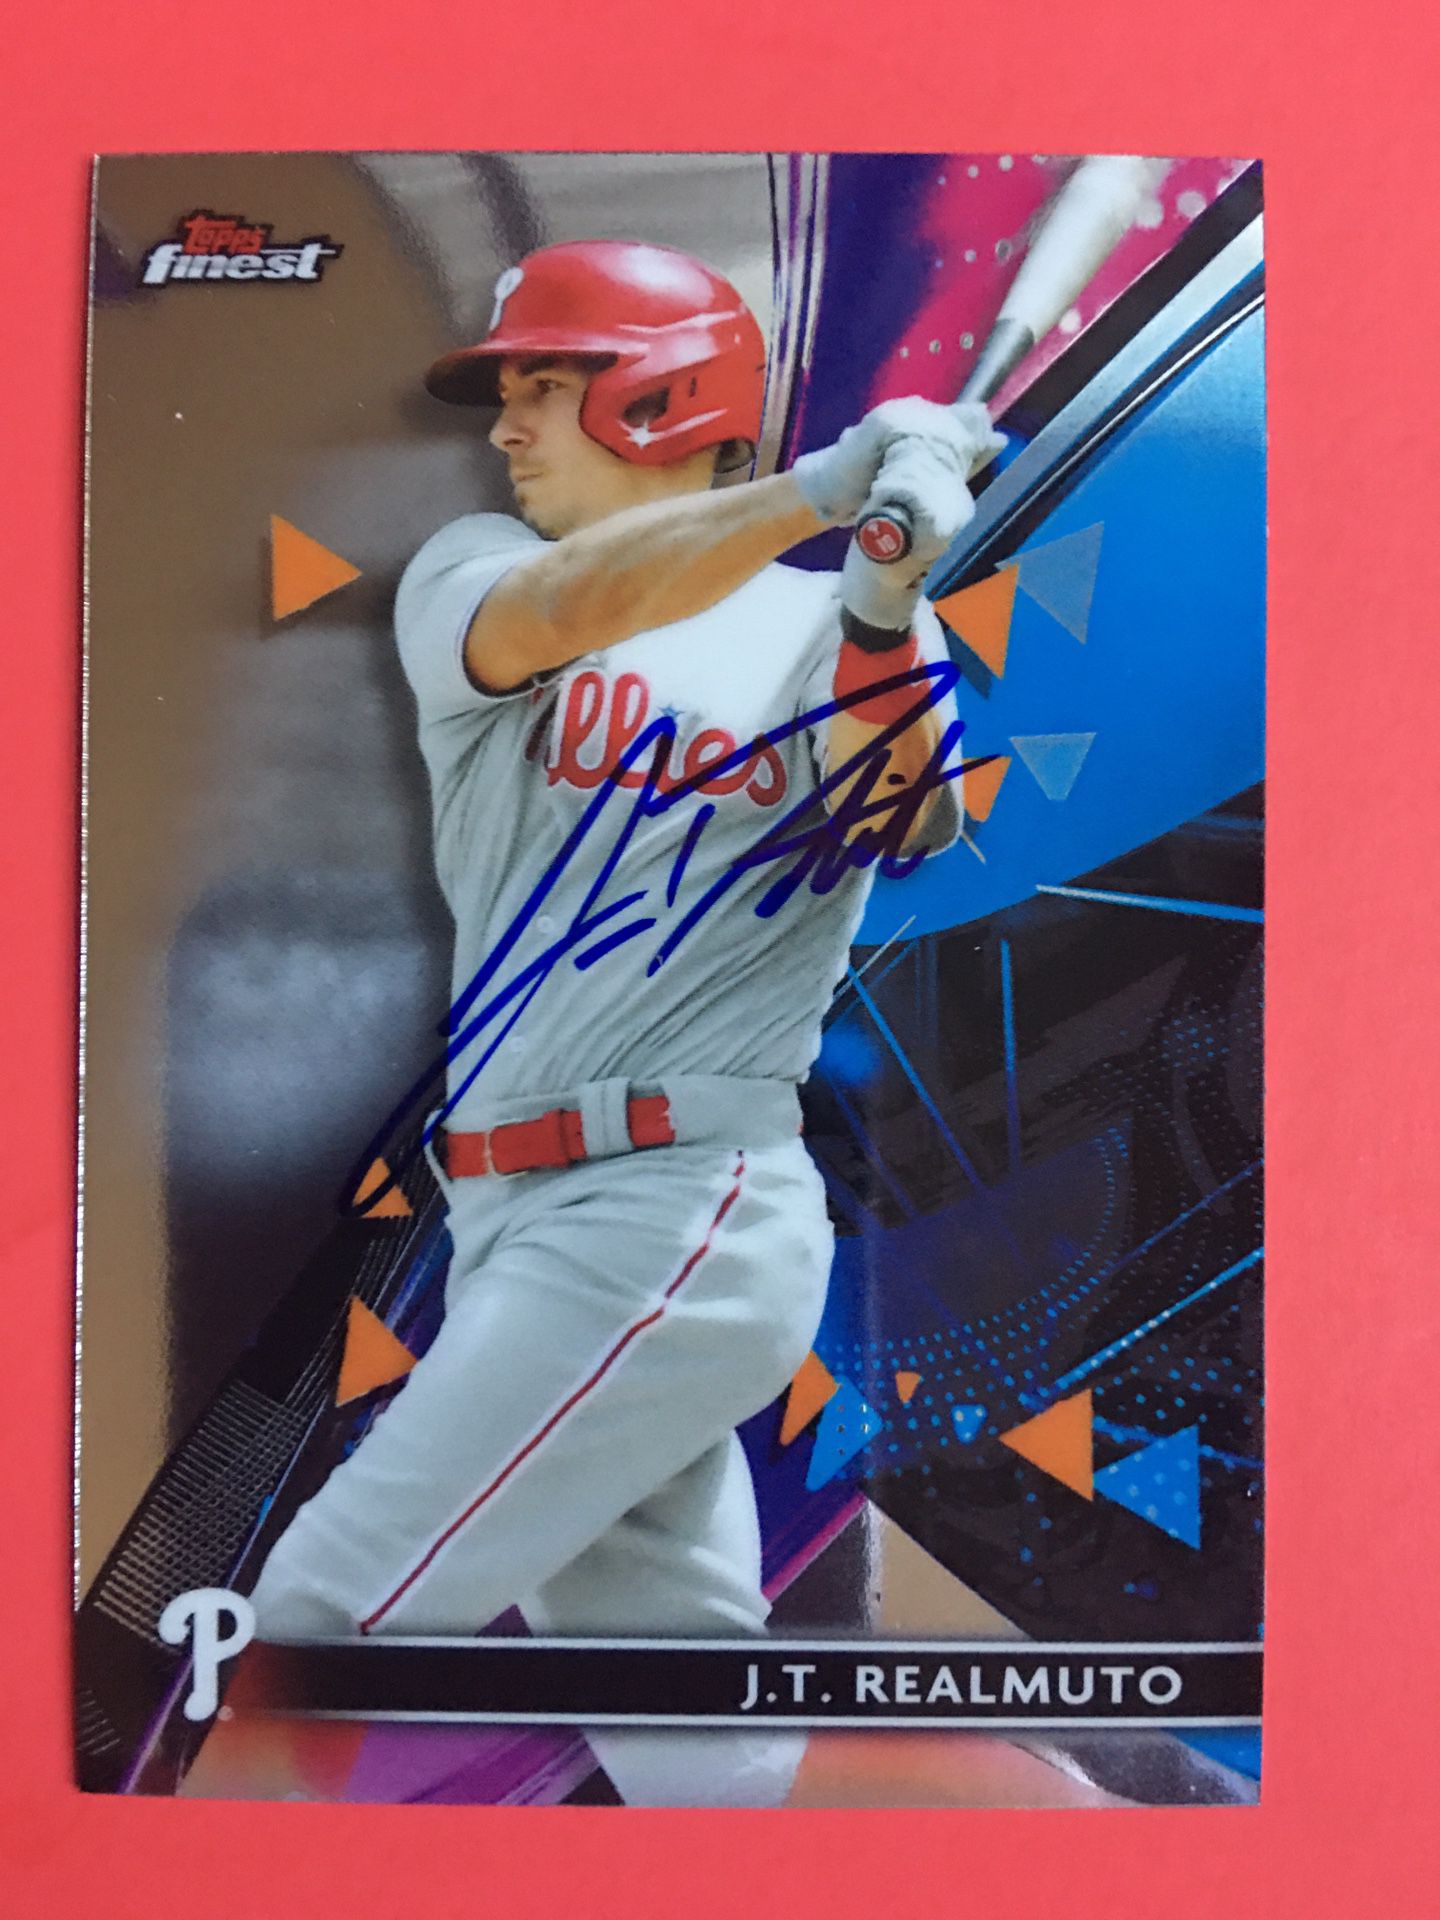 Autograph Card Signed By Phillies J.t. Realmuto.